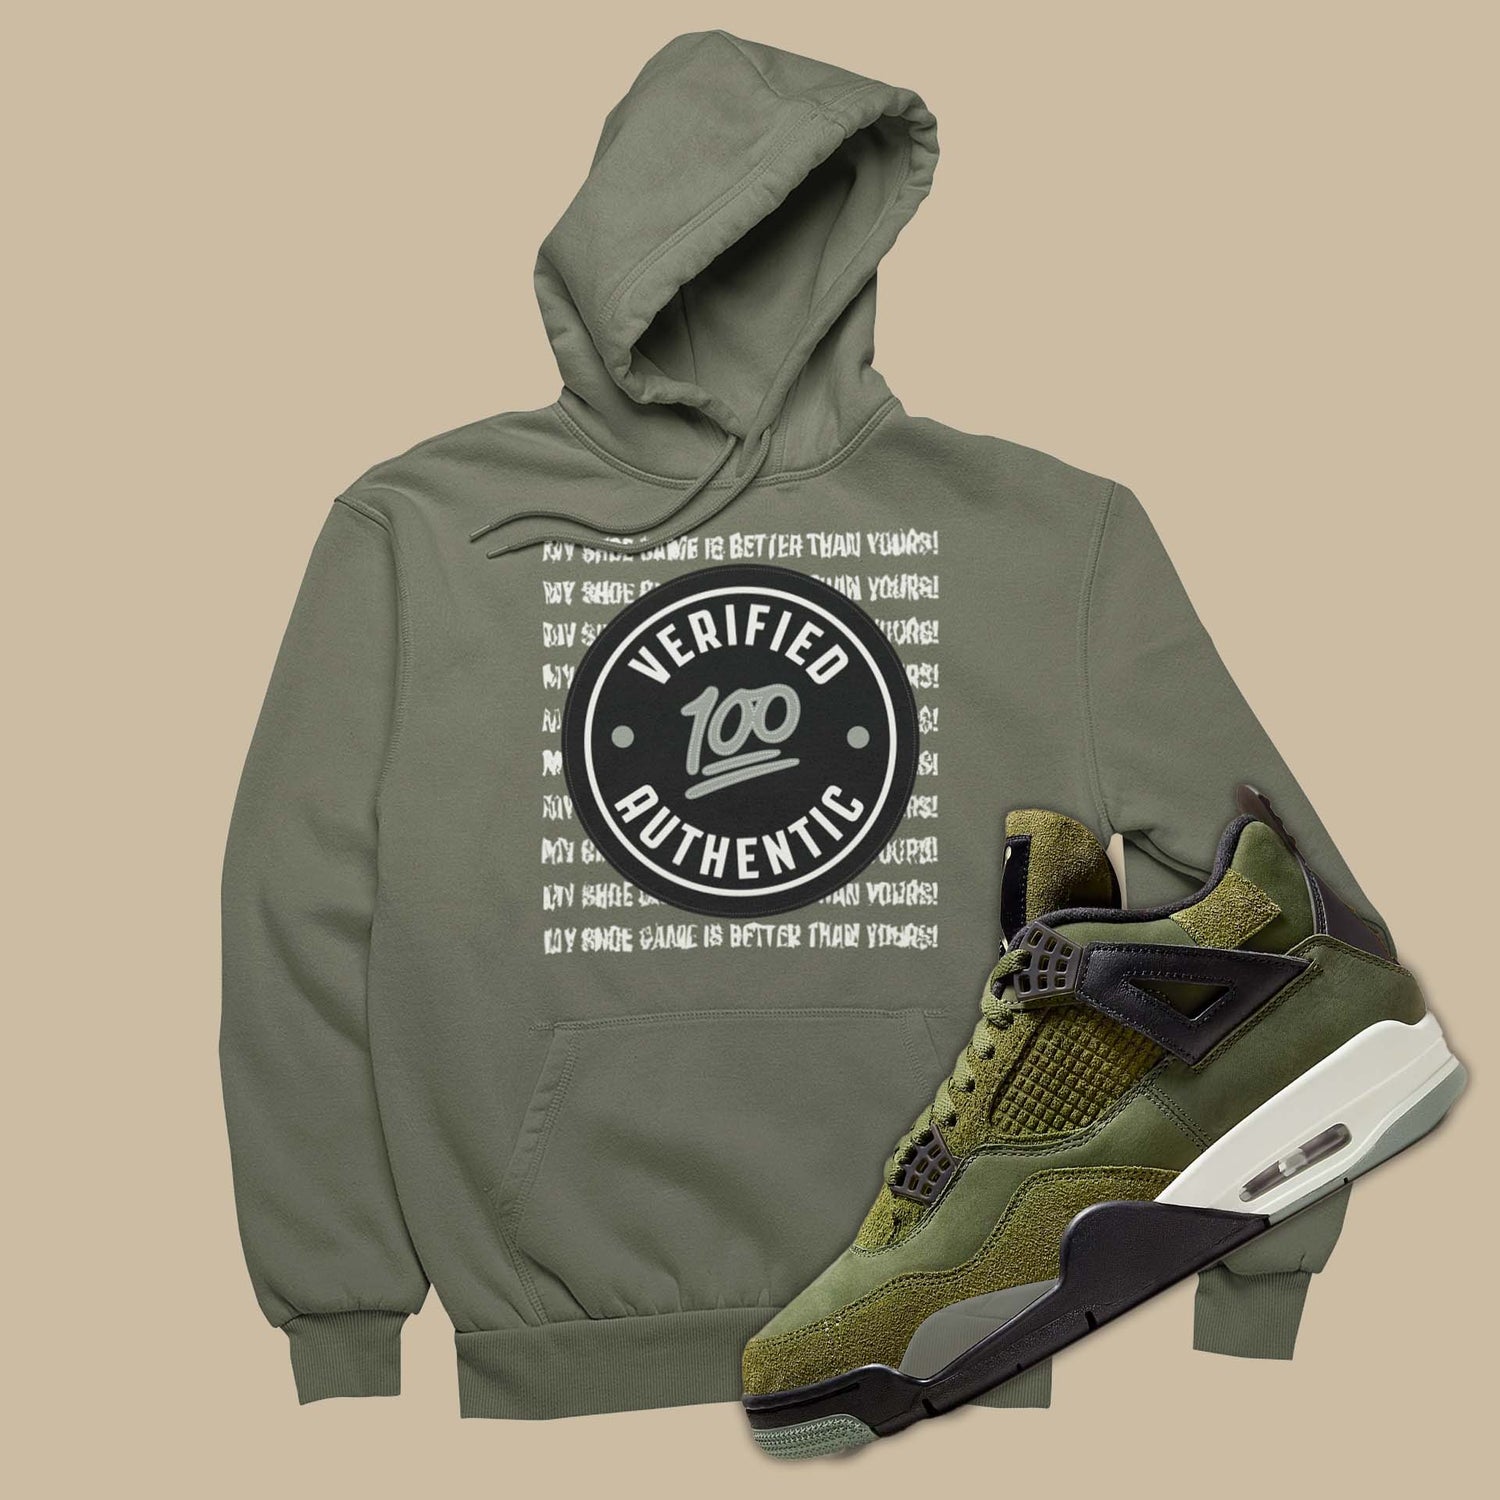 sneaker match hoodie is the perfect sweatshirt to match your Air Jordan 4 Craft Medium Olive